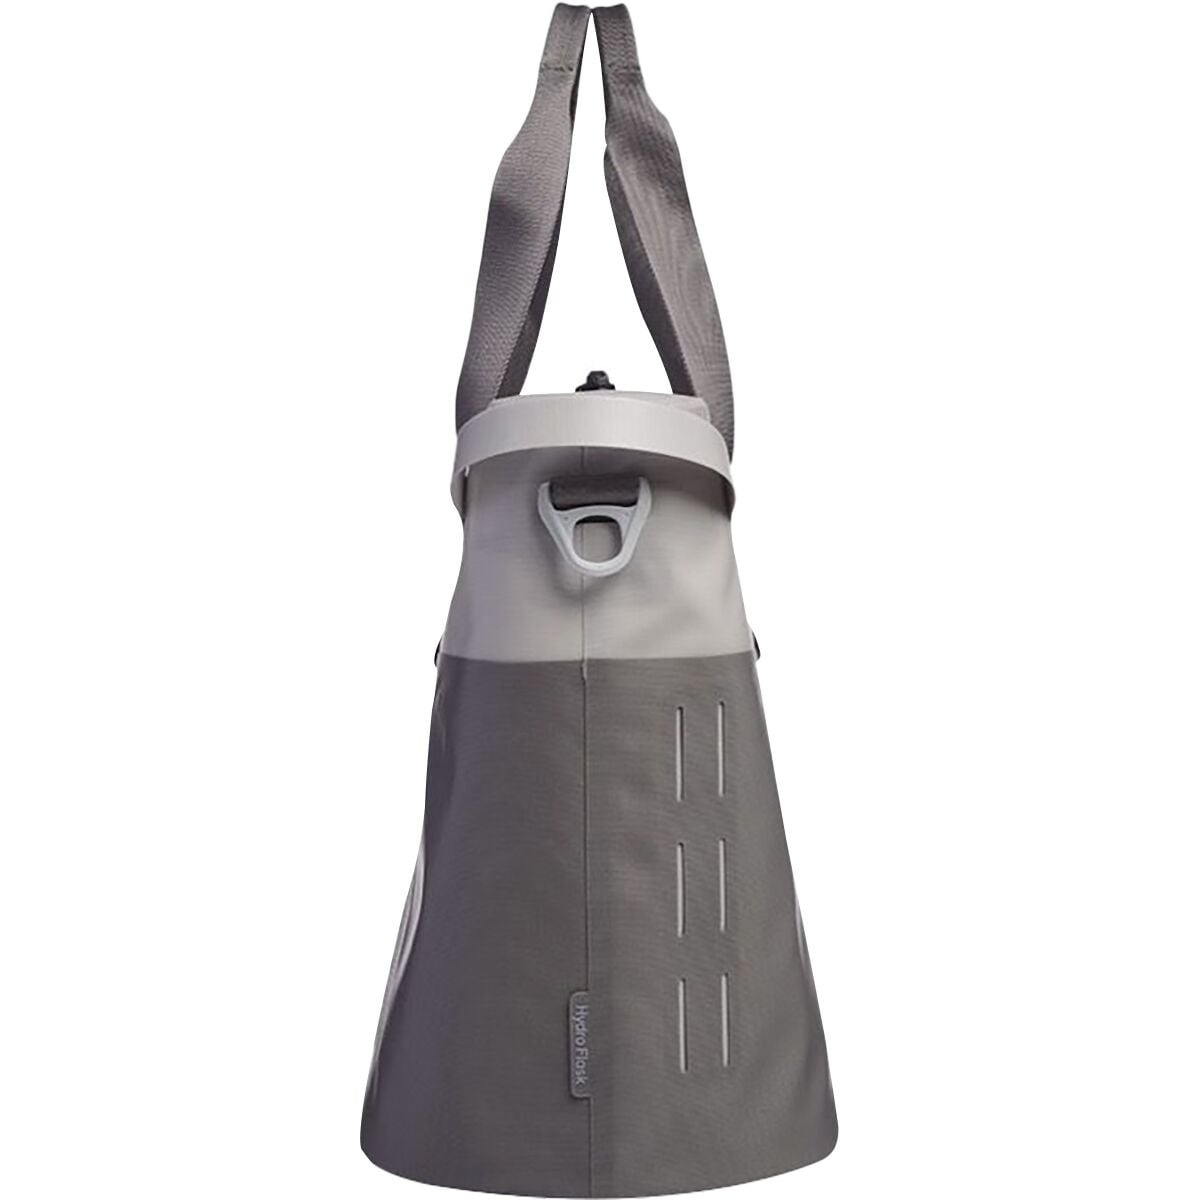  Hydro Flask 26L Day Escape Soft Cooler Tote - Hike & Camp